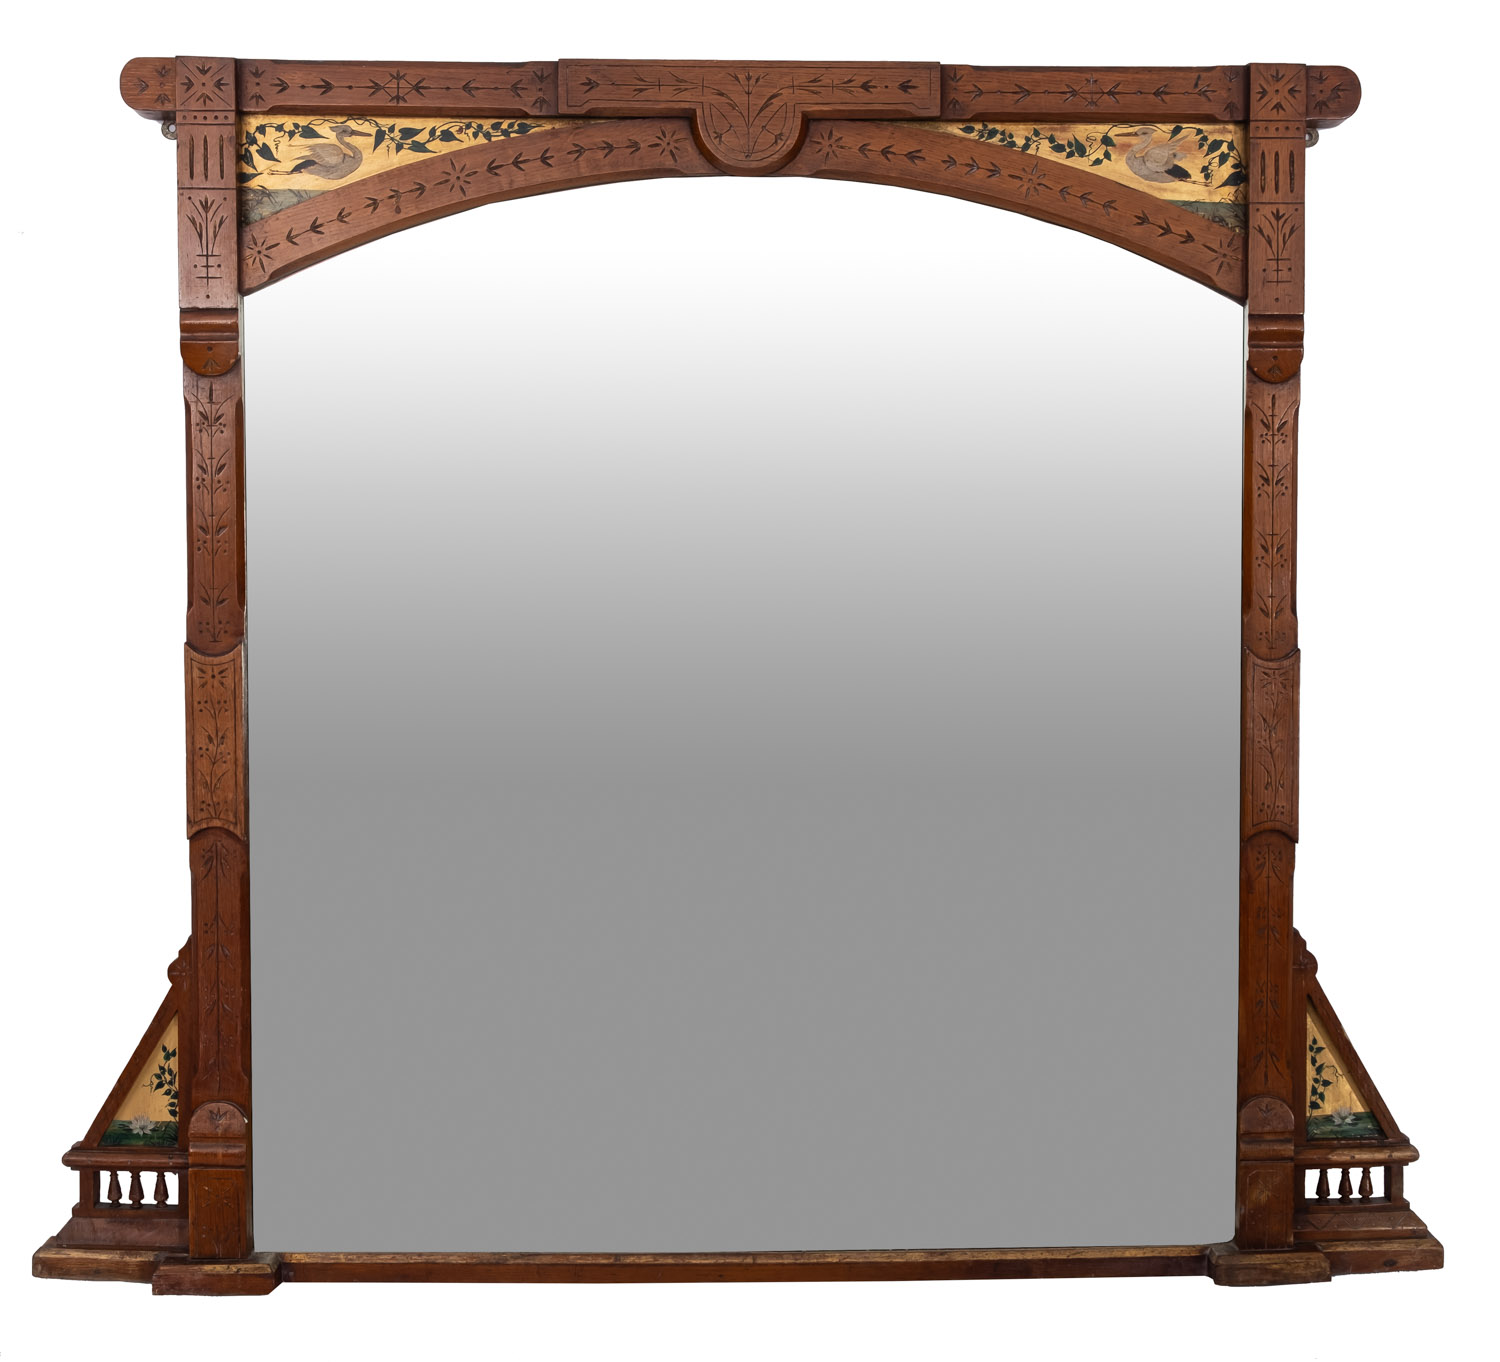 A late Victorian oak and decorated overmantel mirror in the Aesthetic Movement taste with incised